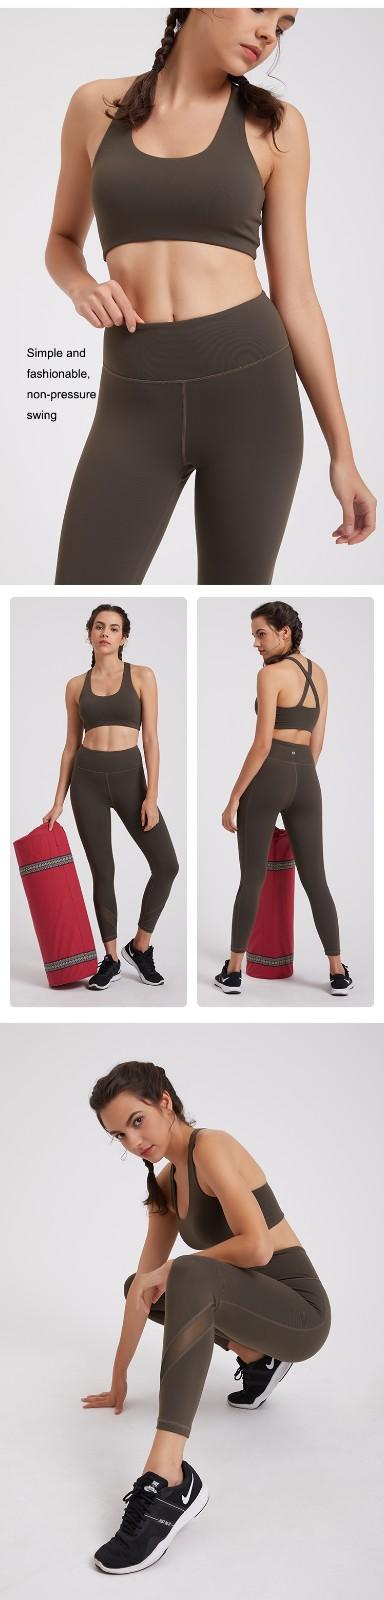 INGOR cute yoga outfits owner for sport